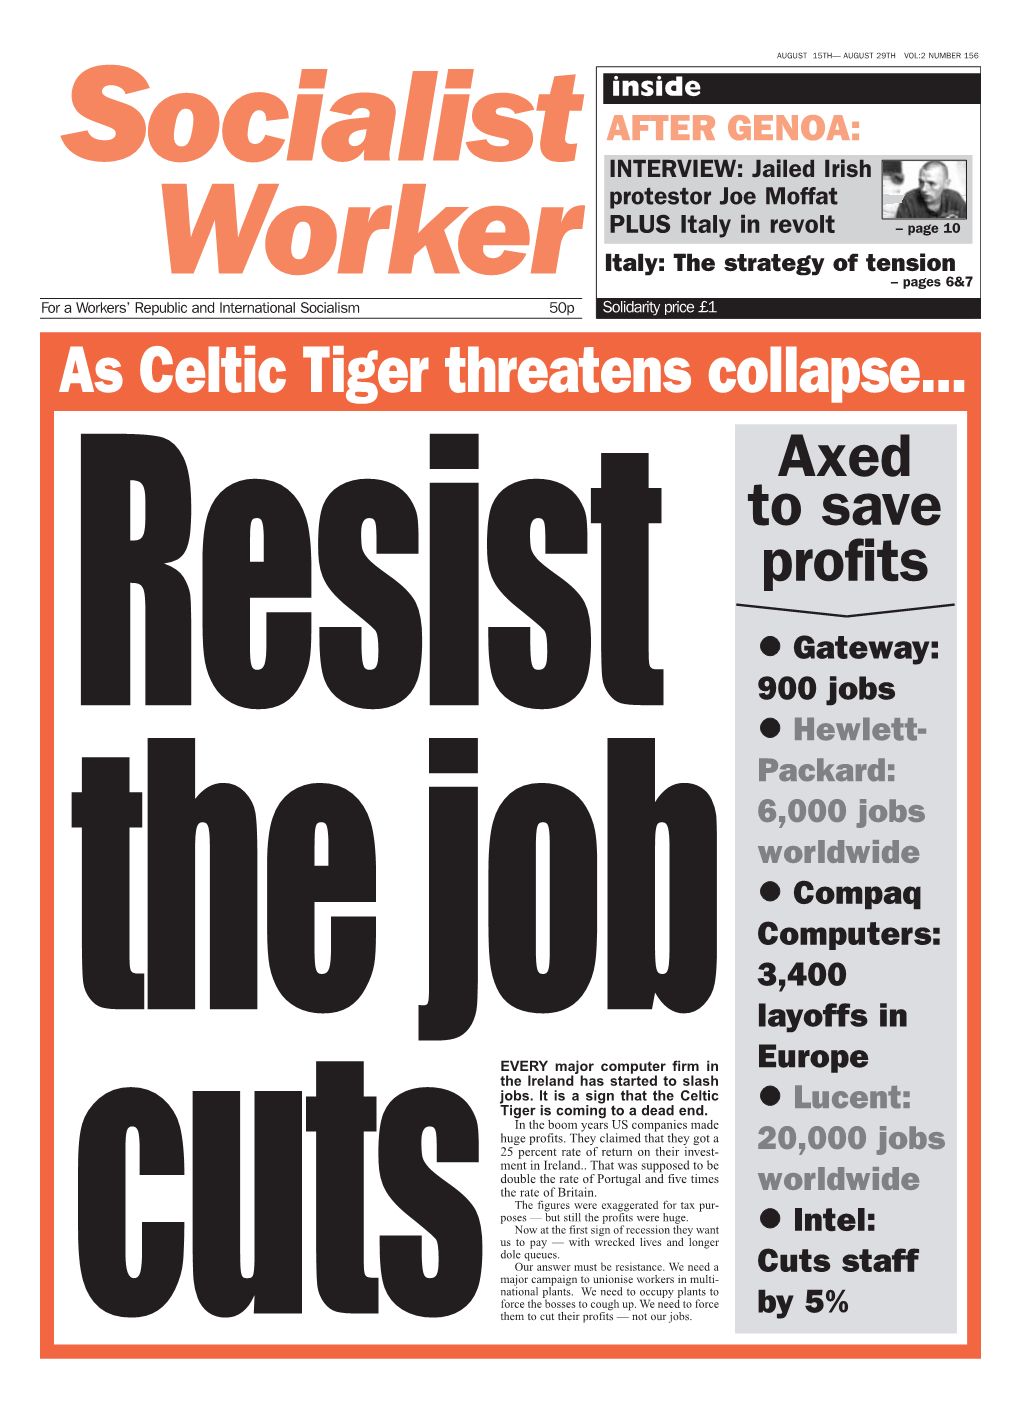 As Celtic Tiger Threatens Collapse... Axed to Save Profits